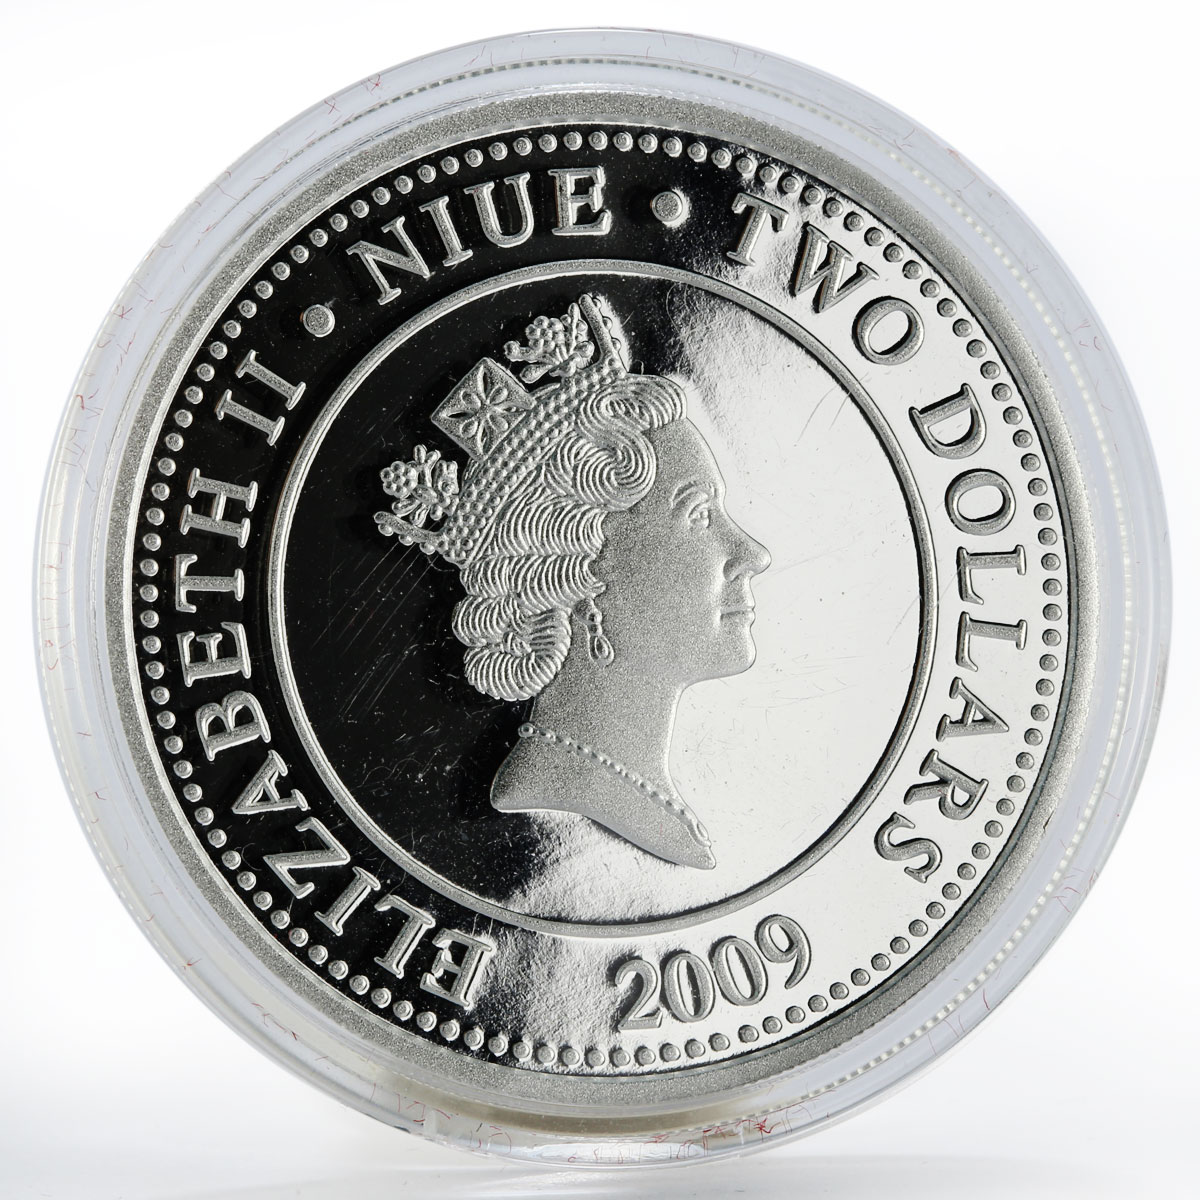 Niue 2 dollars Year of the Ox gilded proof silver coin 2009